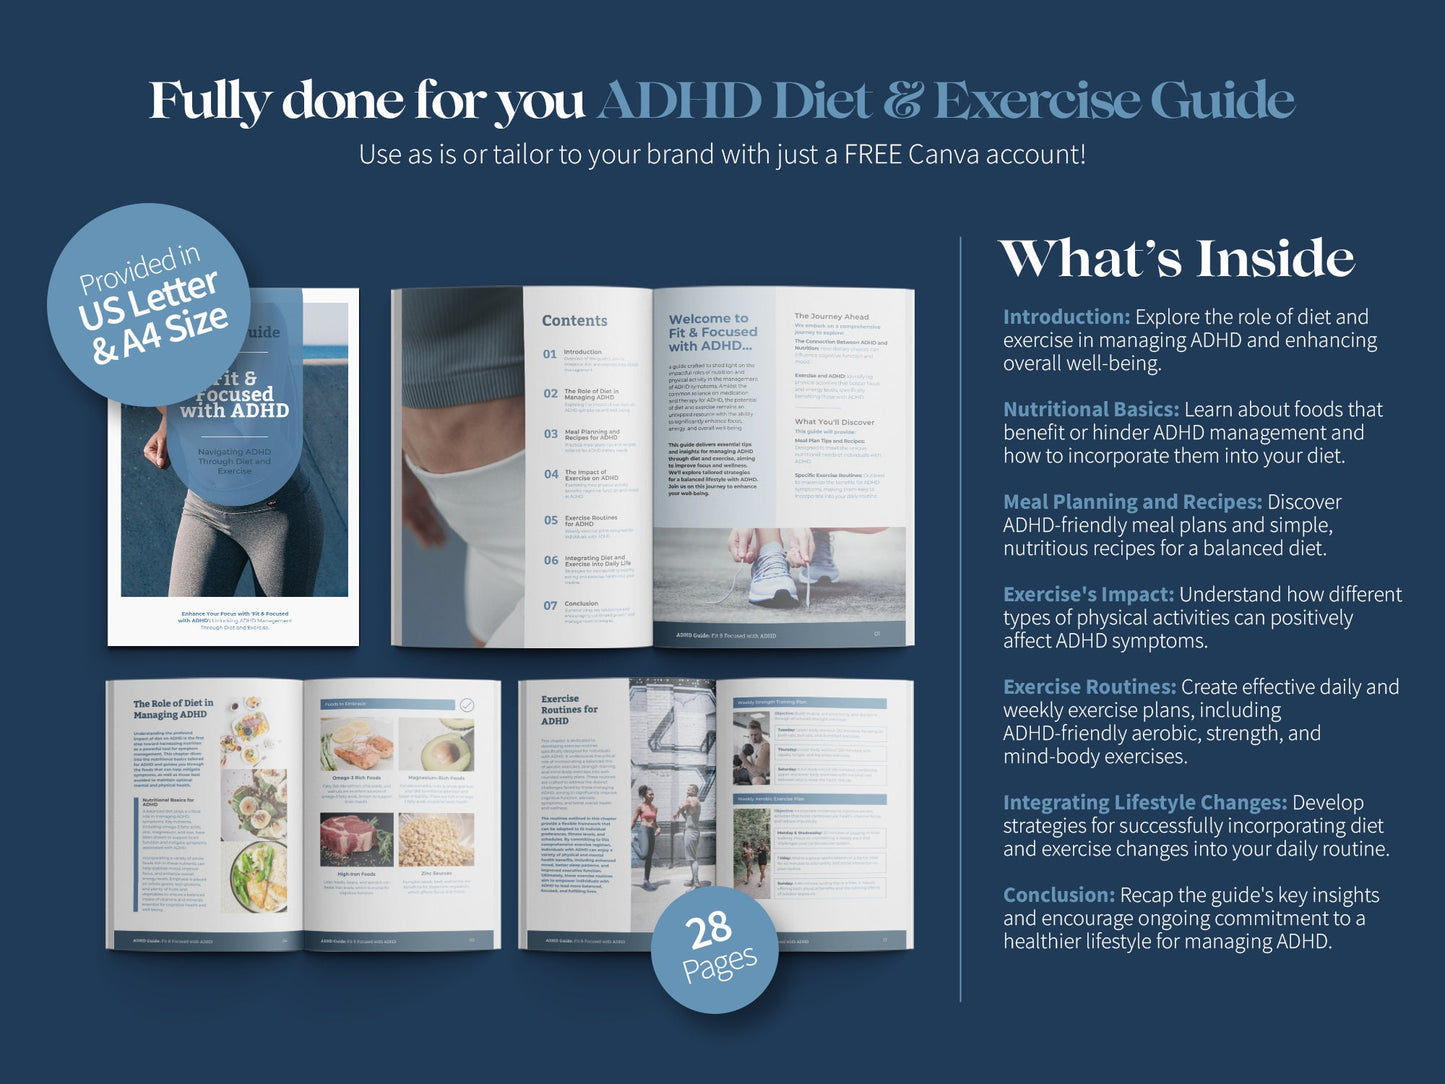 ADHD Diet and Exercise Guide